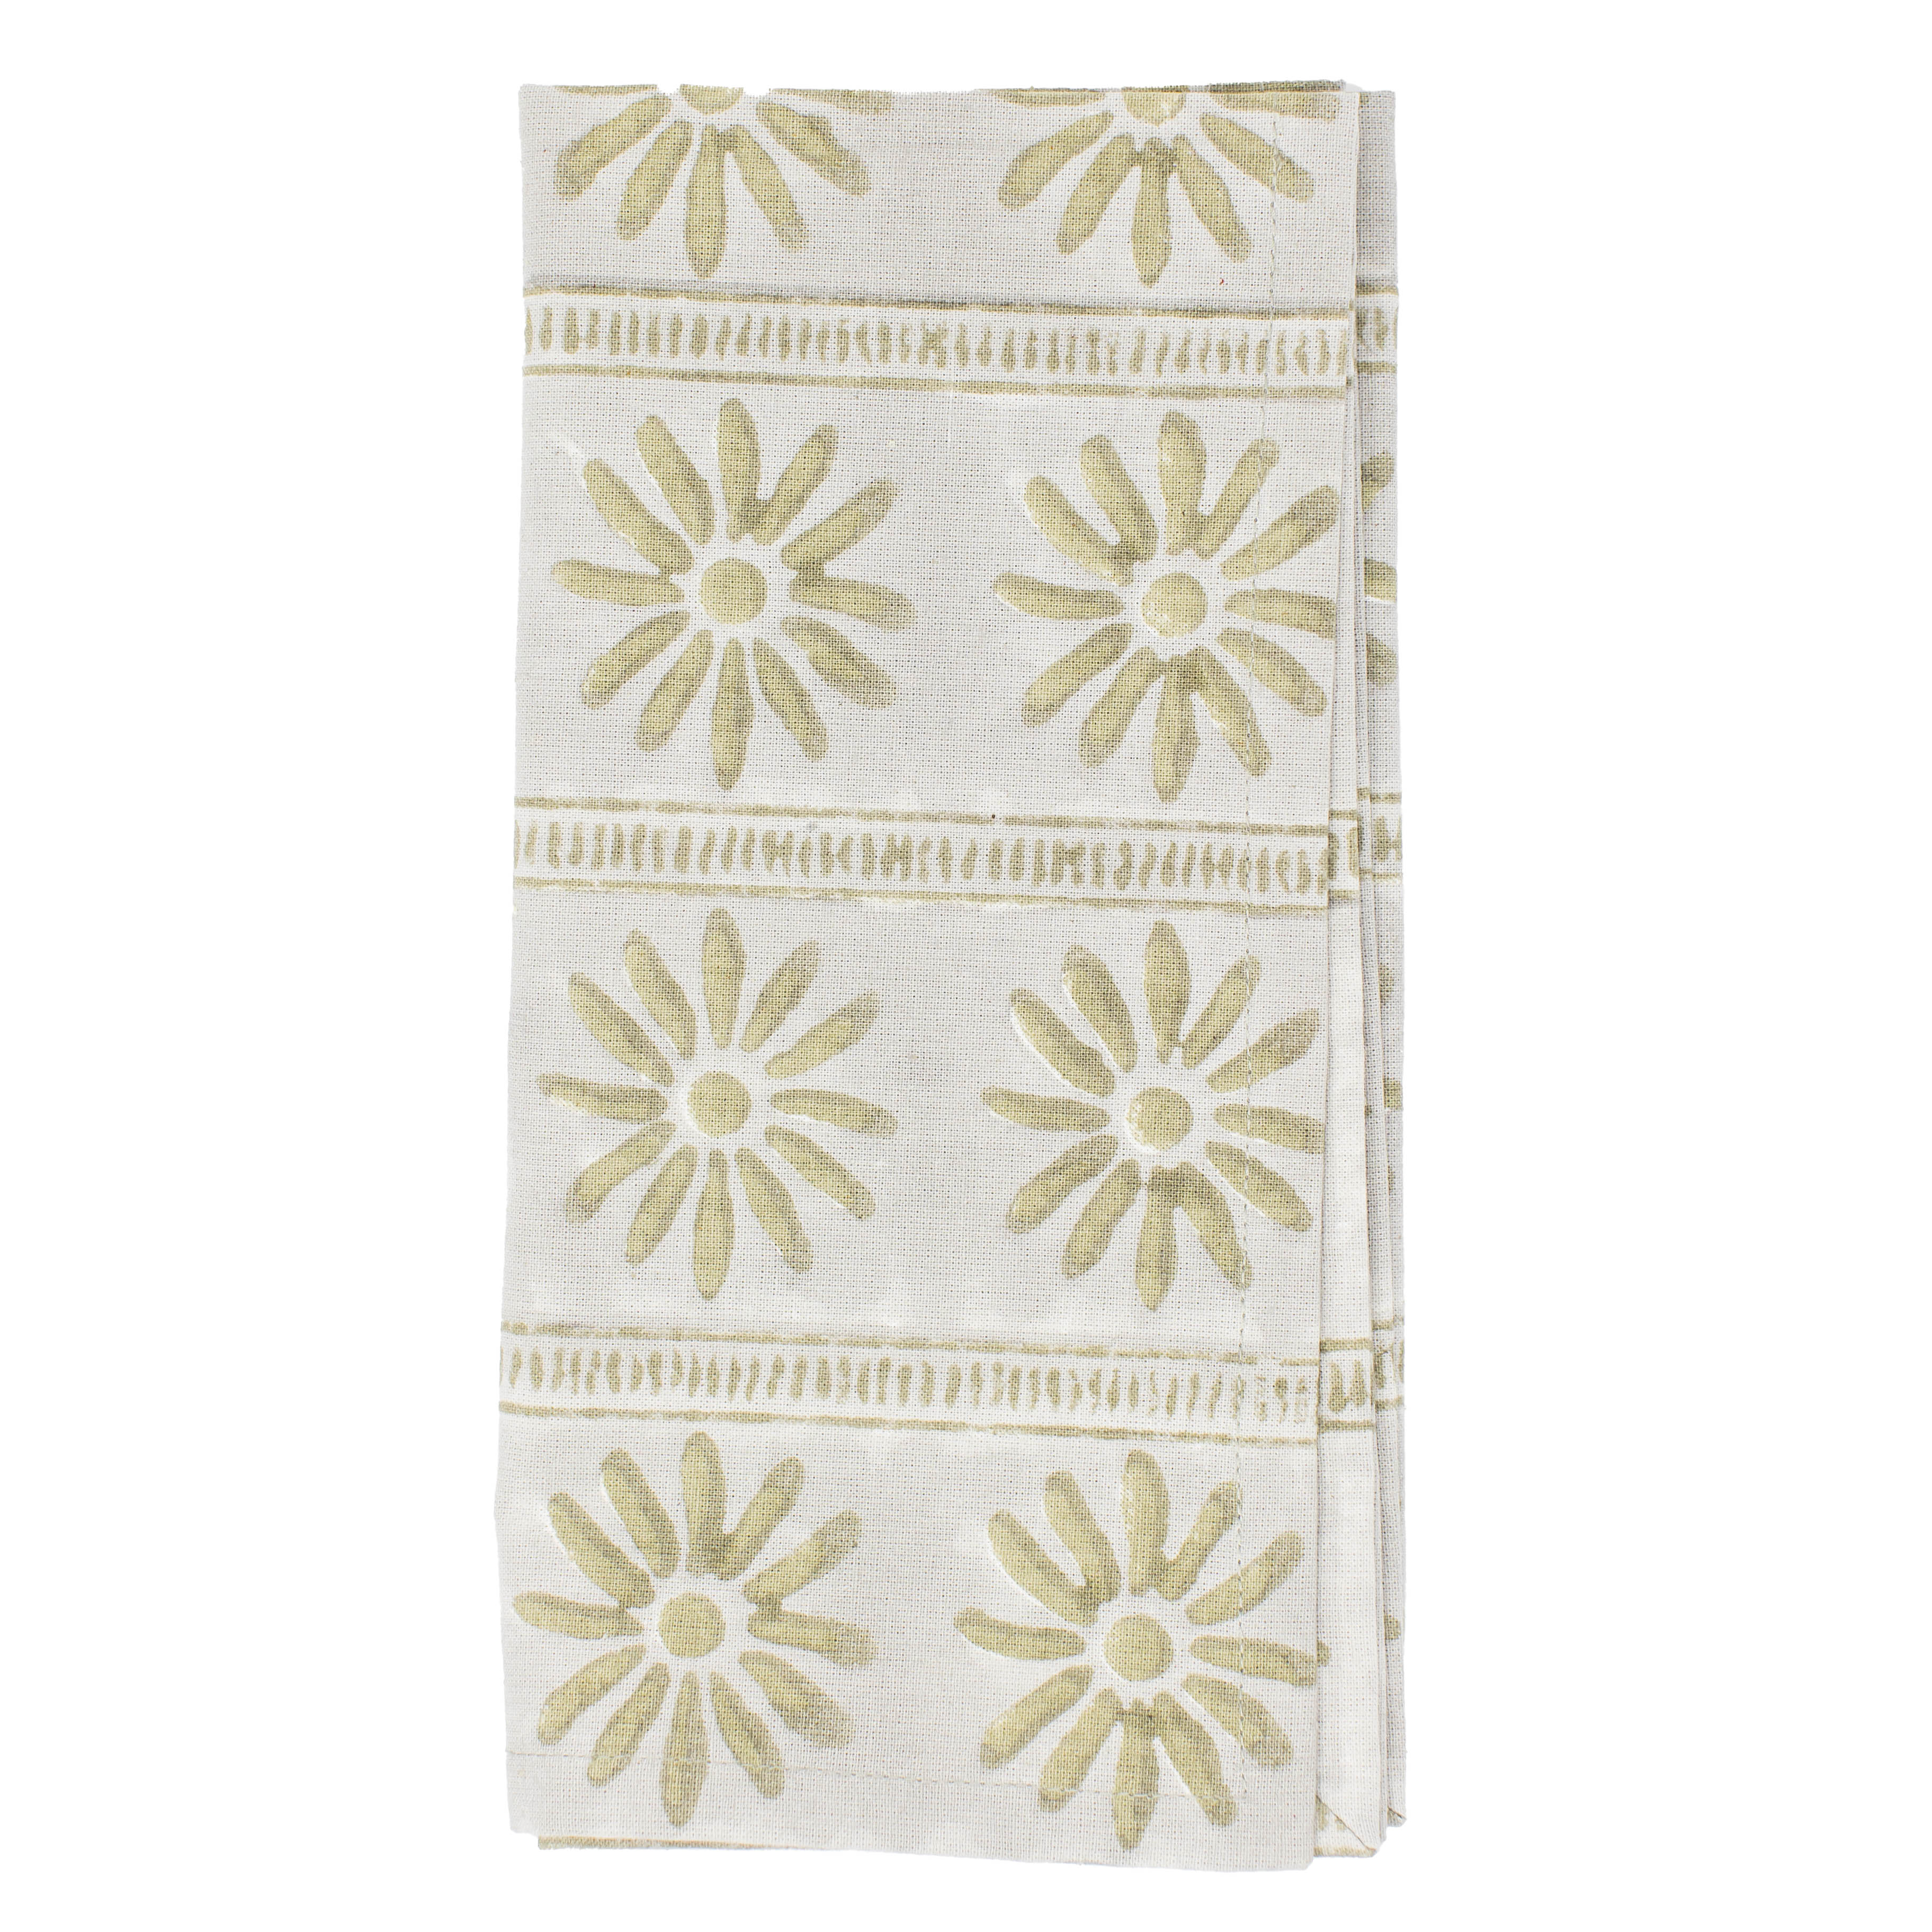 THE GREEN FLORAL AND LADDER NAPKIN SET